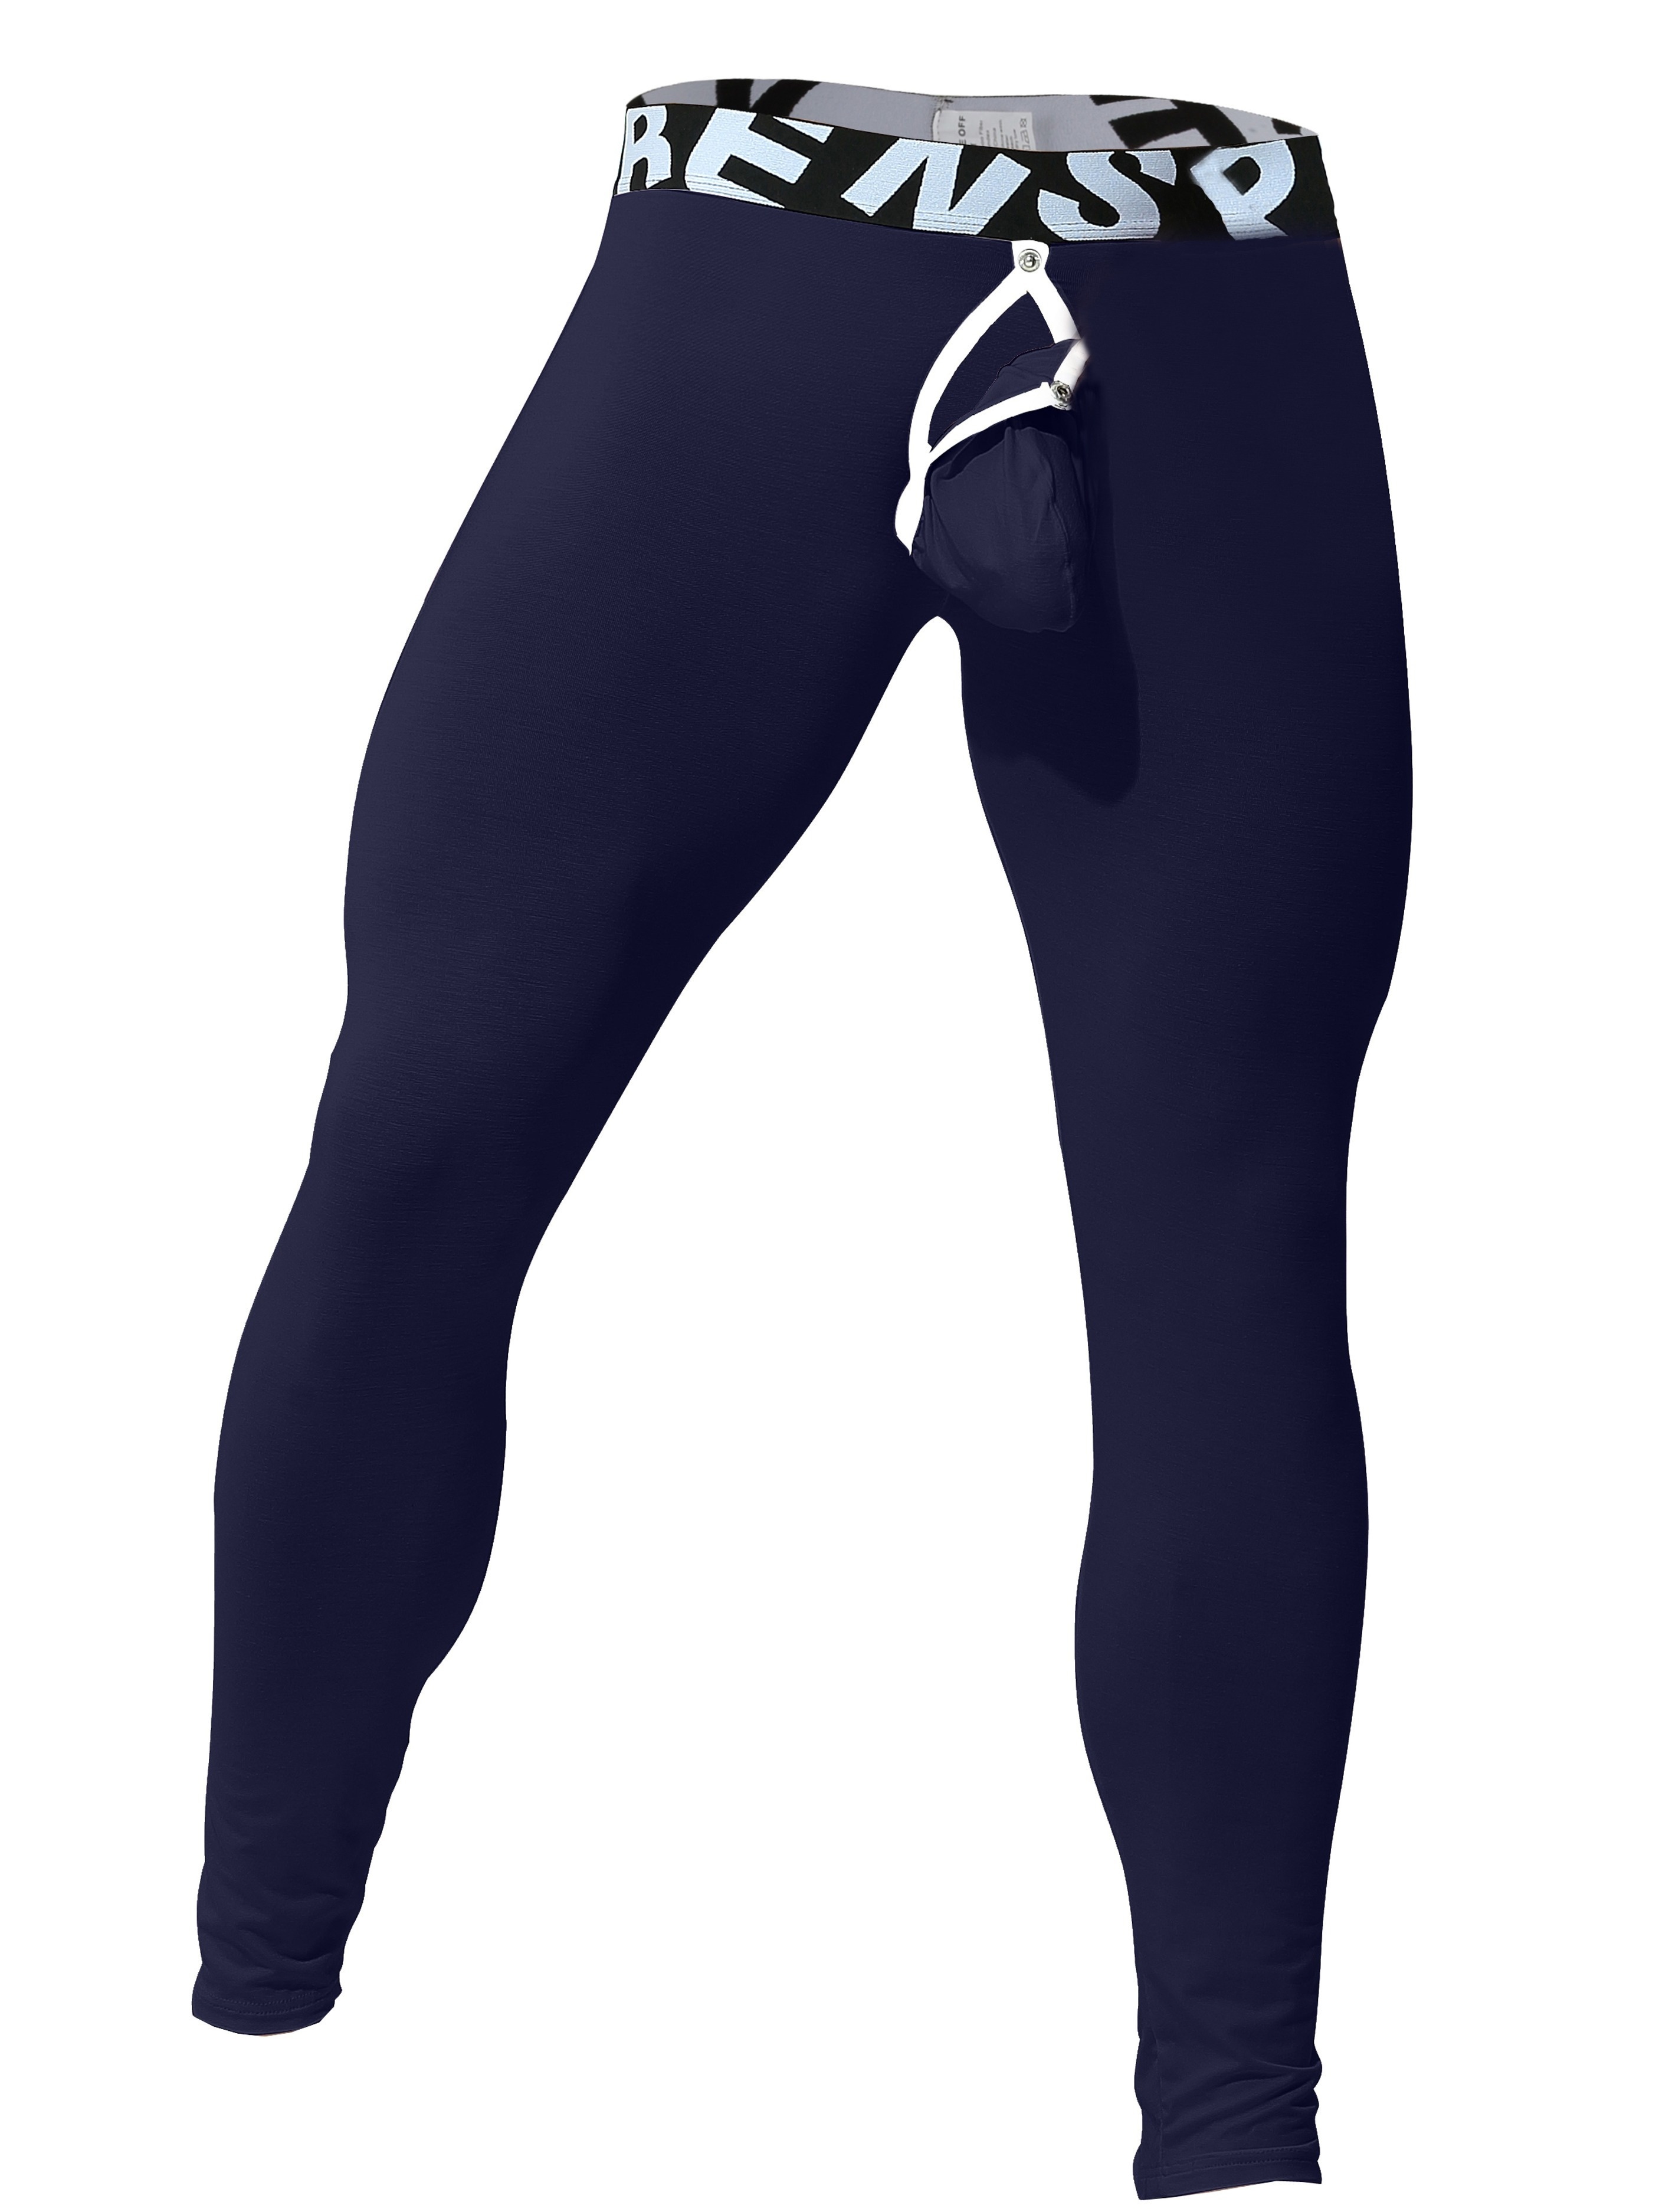 Under Armour Active Pants, Tights & Leggings